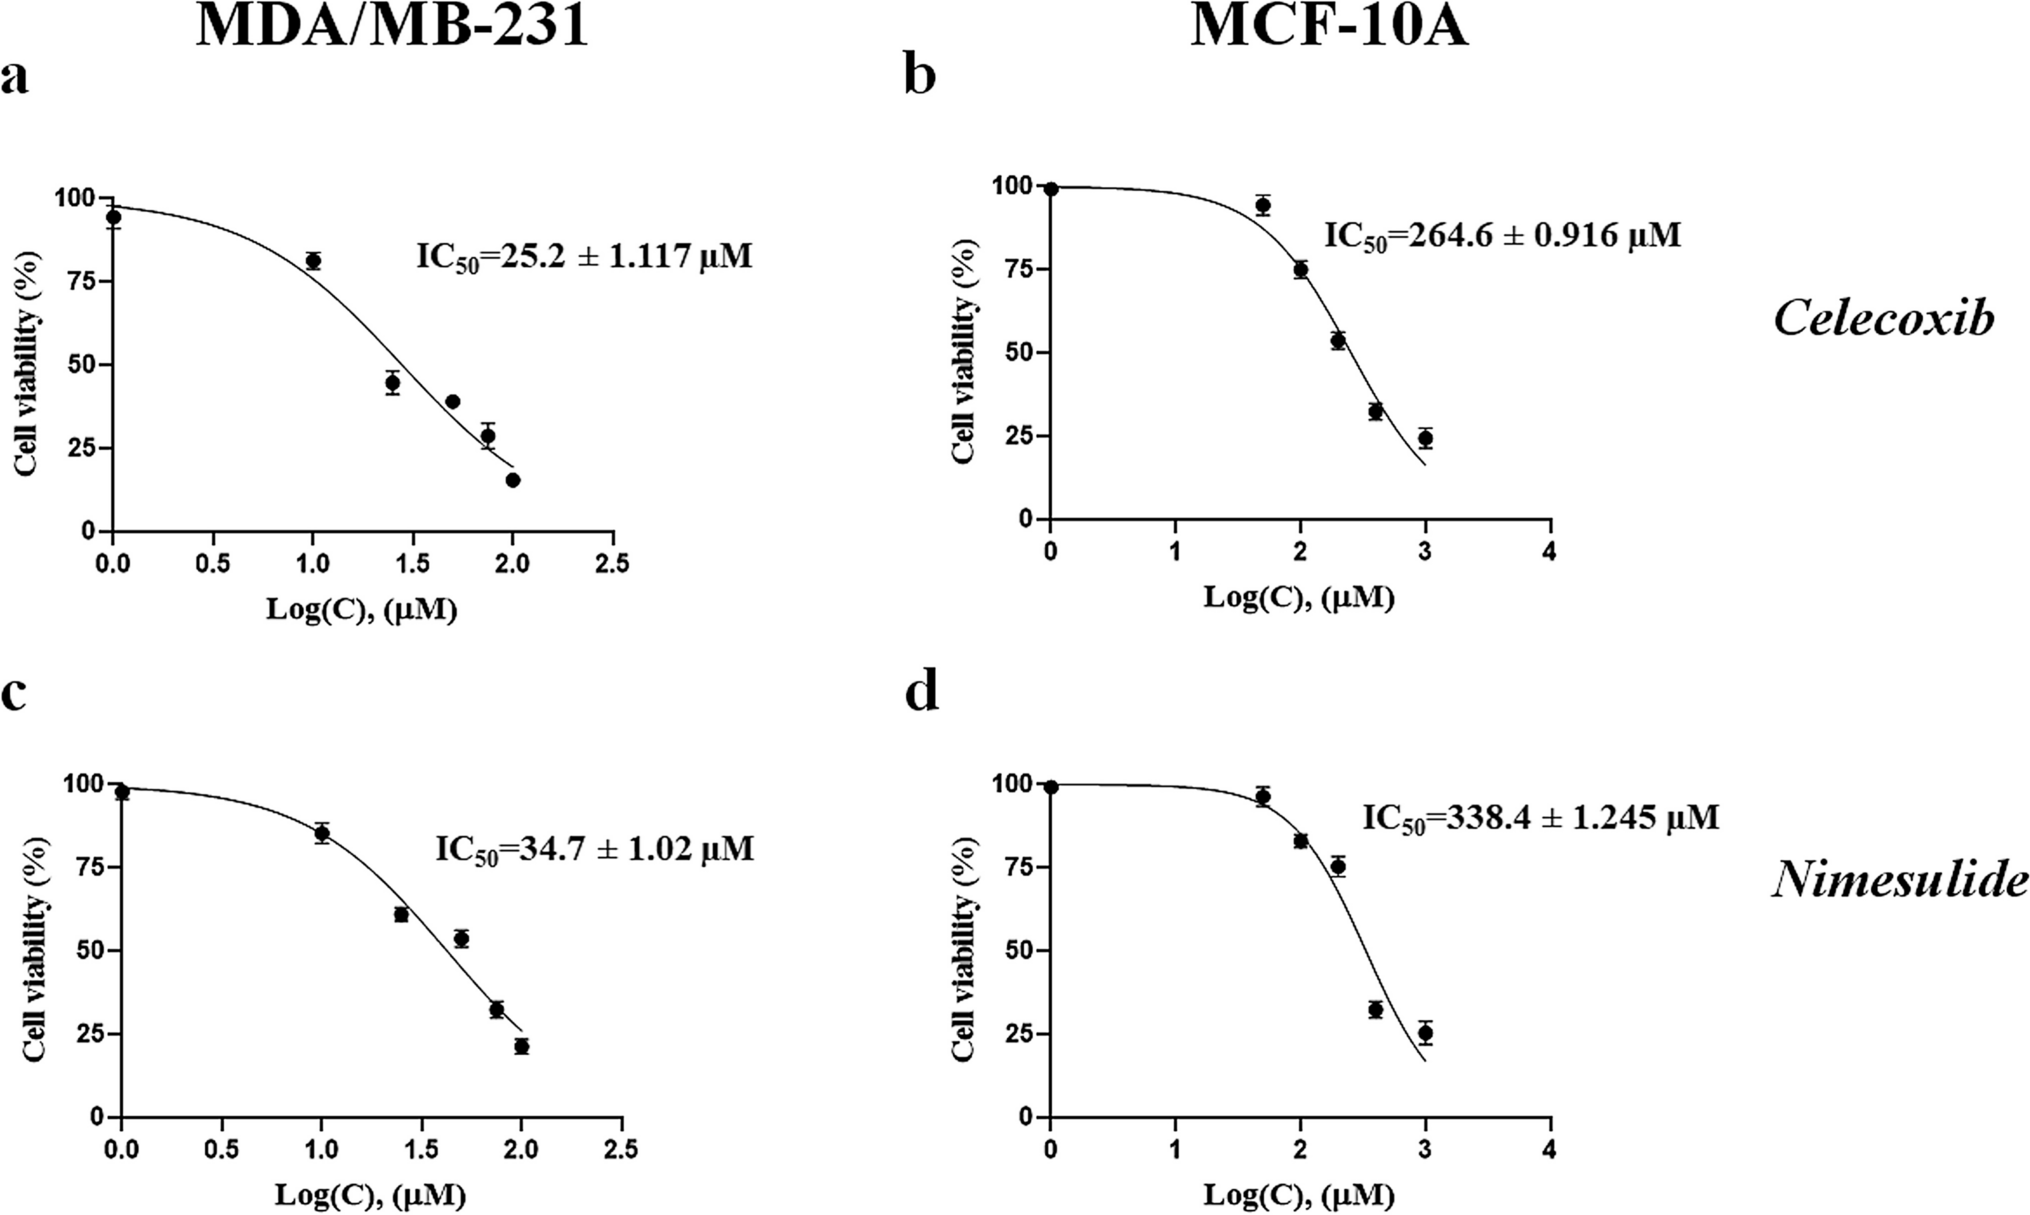 Celecoxib inhibits NLRP1 inflammasome pathway in MDA-MB-231 Cells